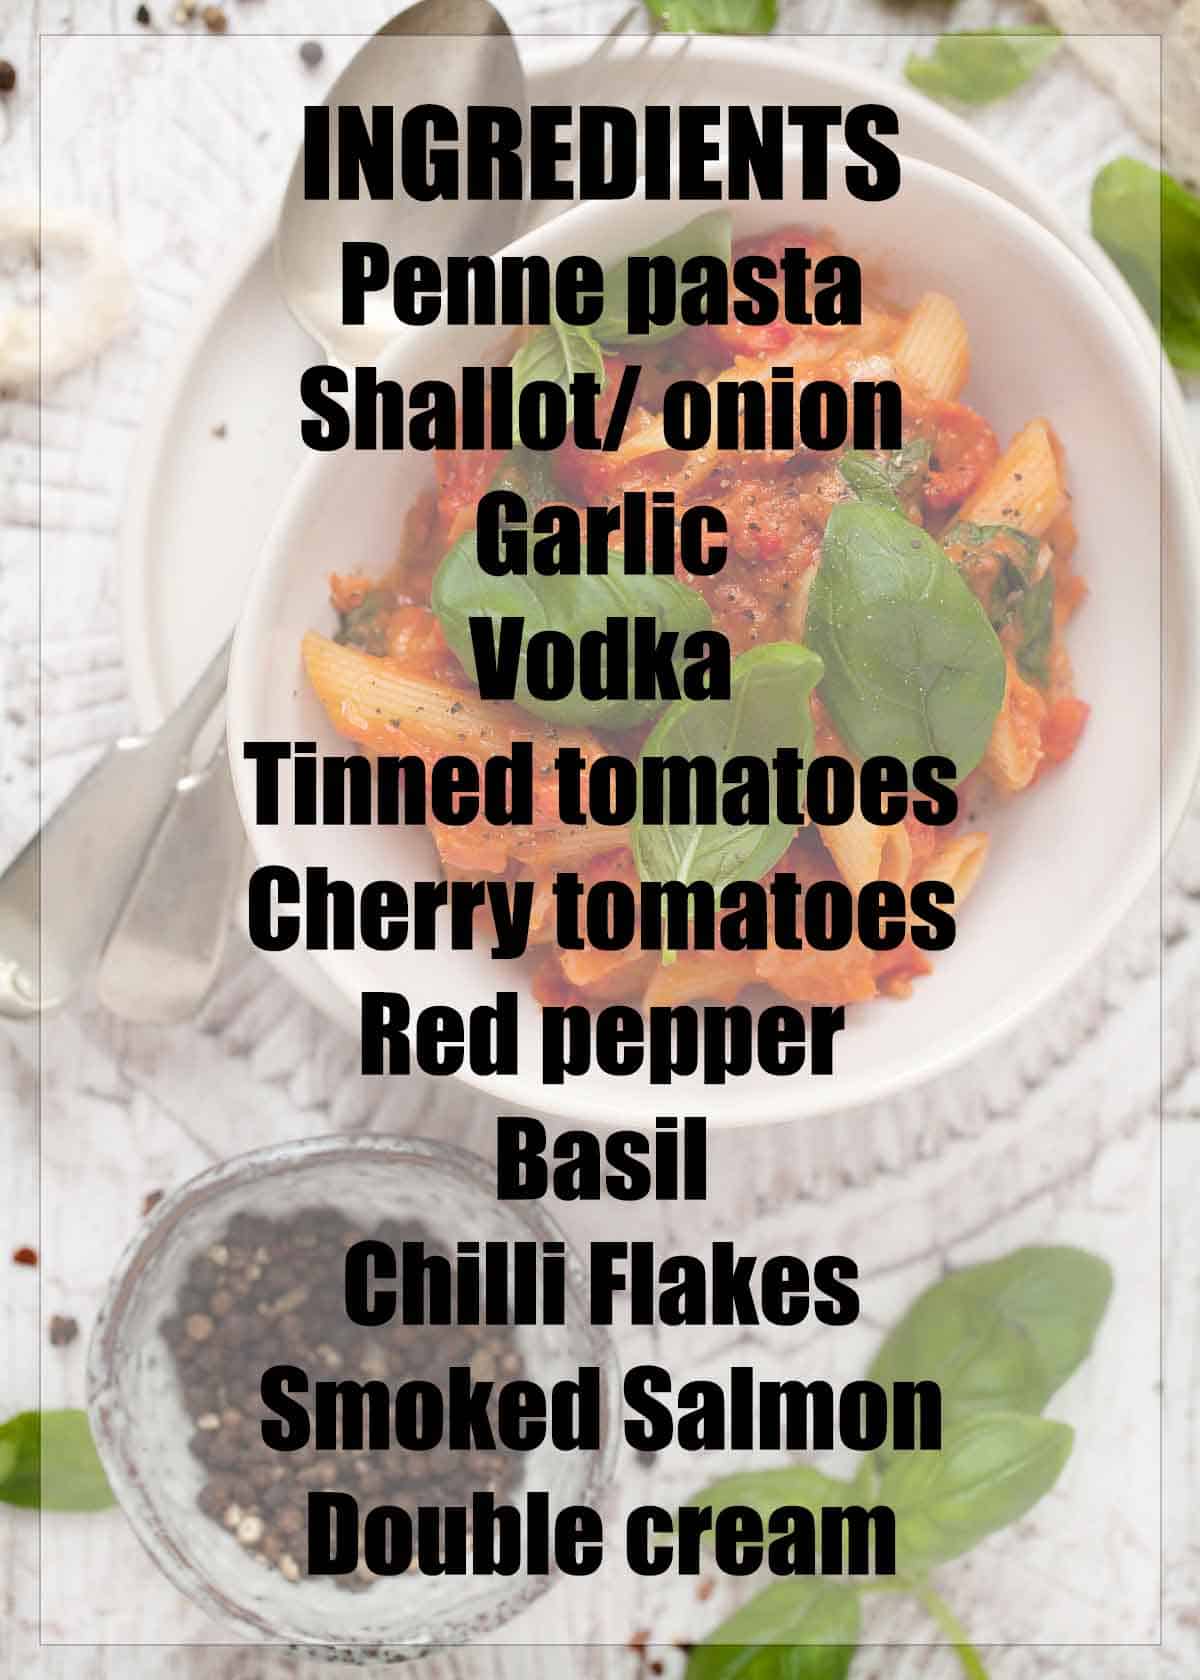 Text list of ingredients for pasta with vodka sauce overlaying a photo of the finished dish